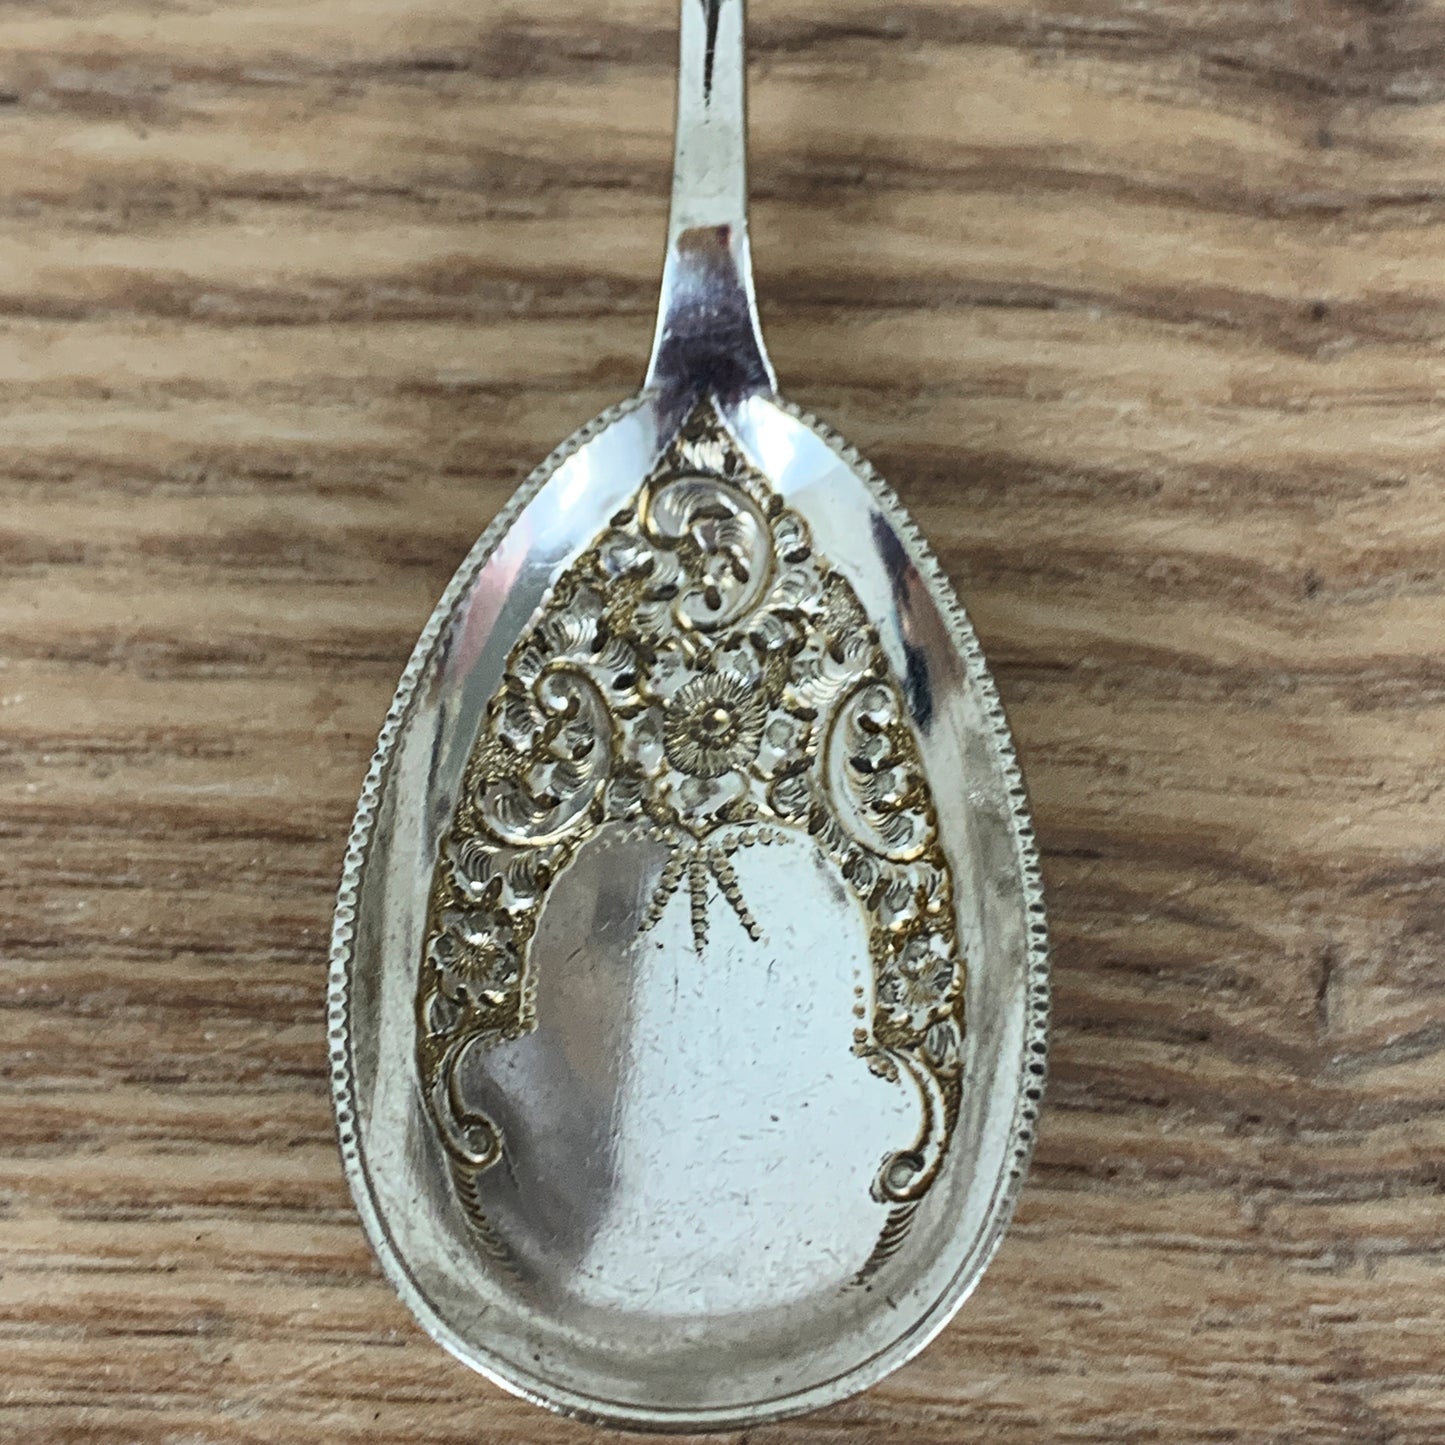 Vintage Silver Plated Spoon with Decorative Handle and Bowl